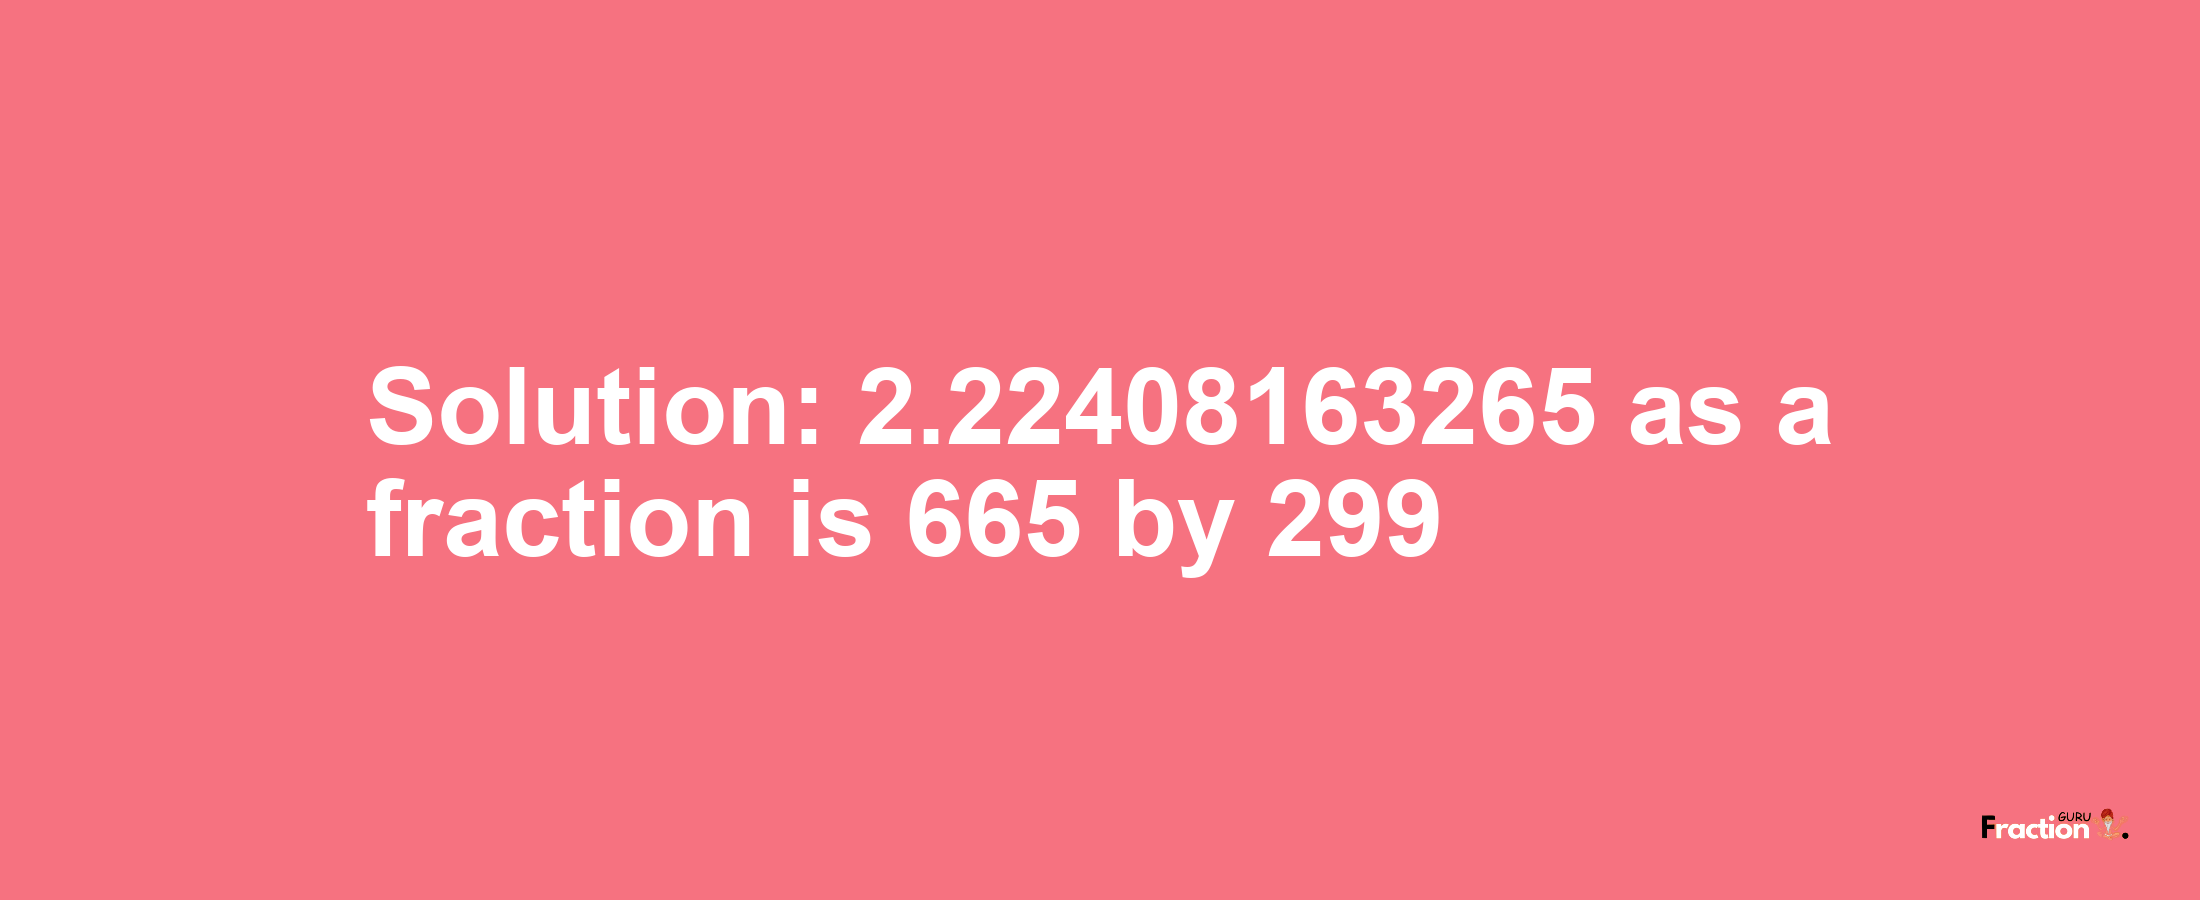 Solution:2.22408163265 as a fraction is 665/299